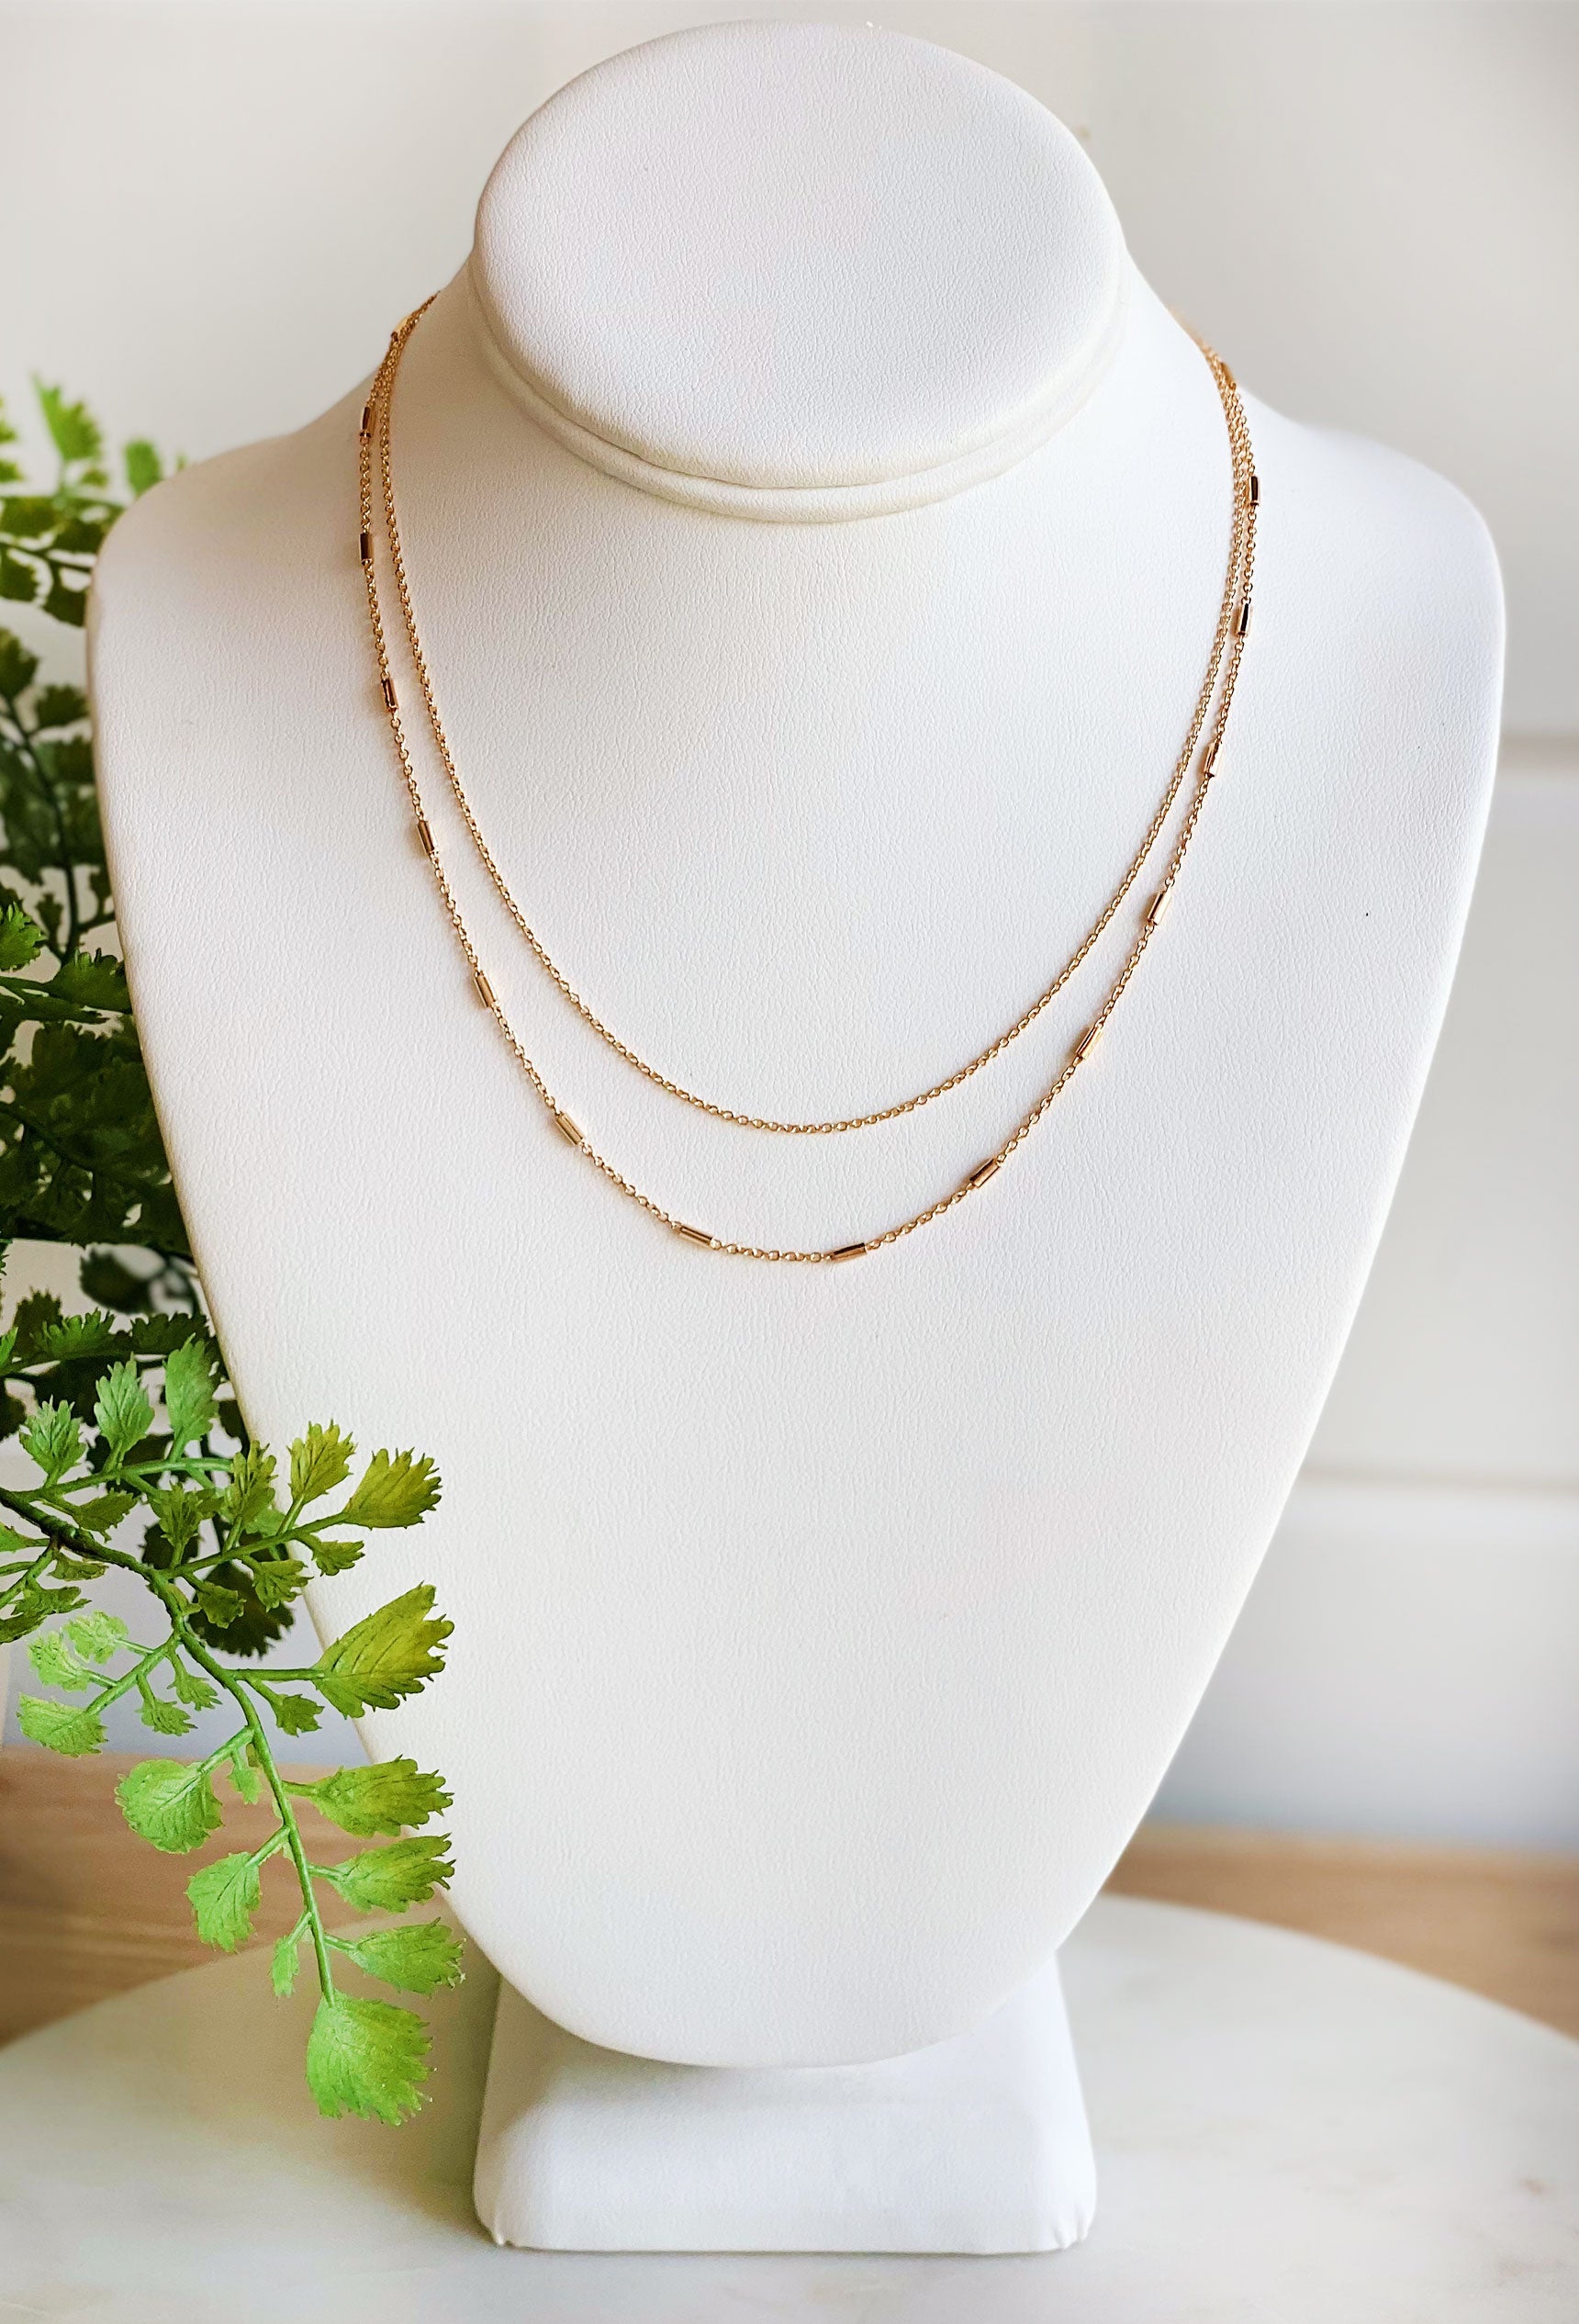 Emery Gold Chain Necklace, layered chain with lobster clasp